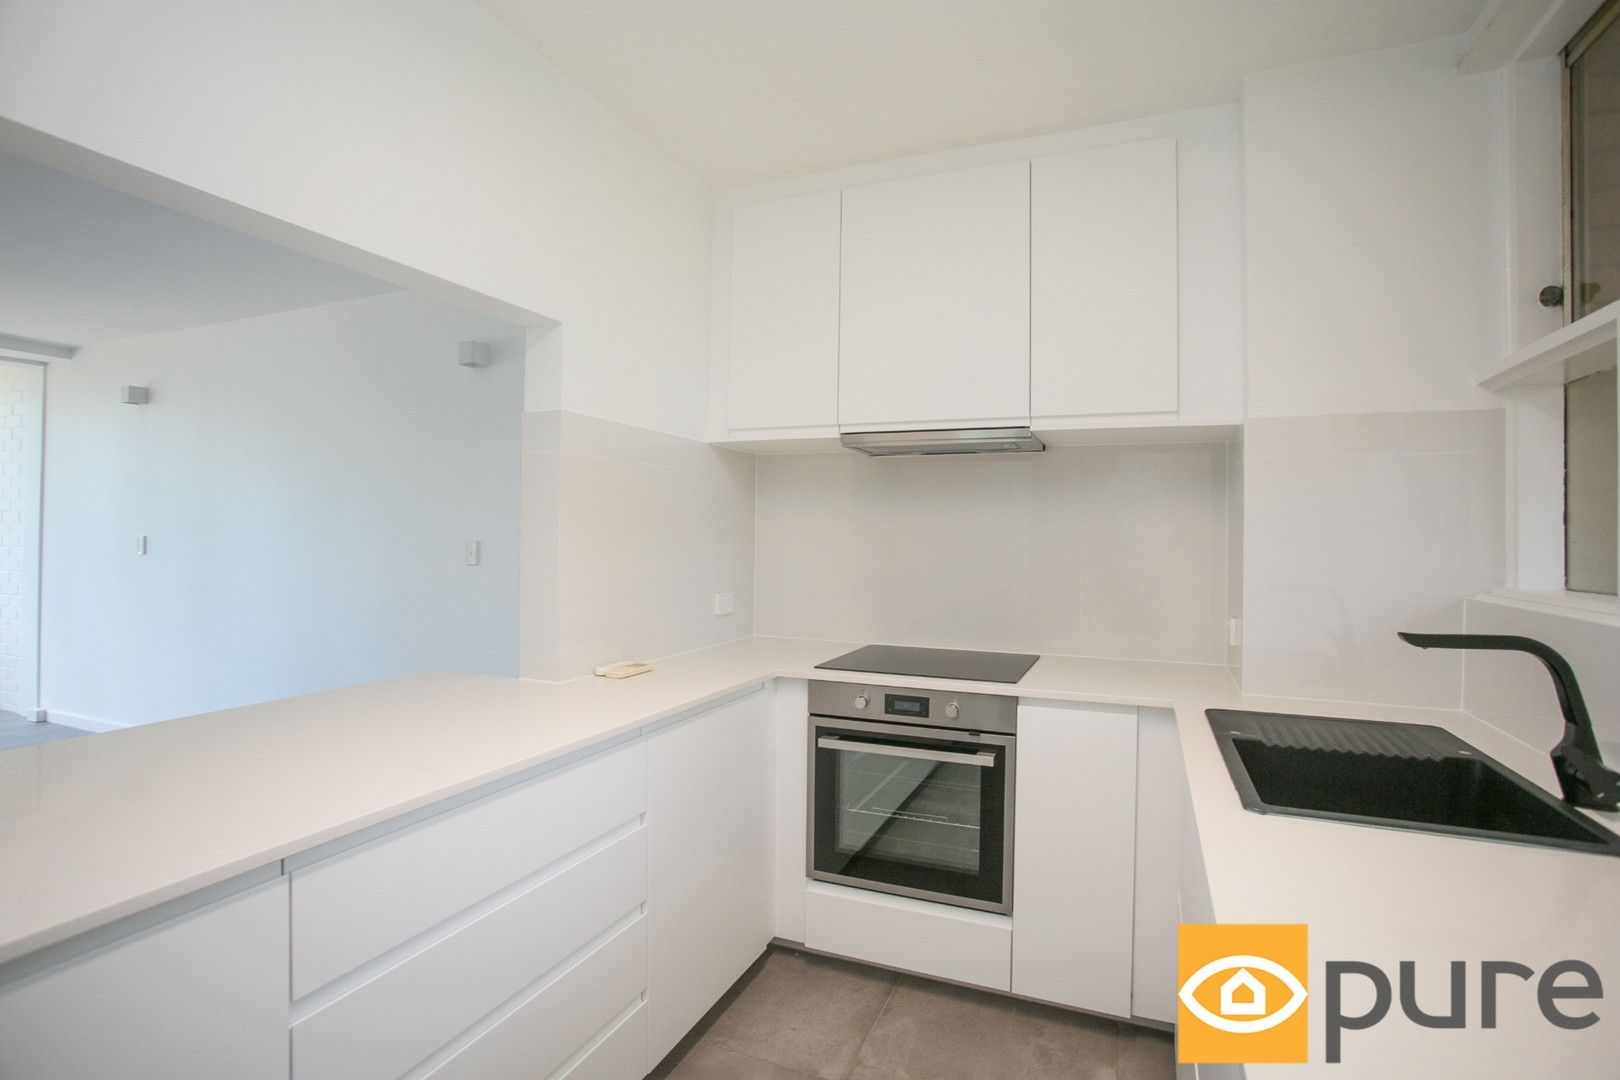 2 bedrooms Apartment / Unit / Flat in 2/187 Broome Street COTTESLOE WA, 6011